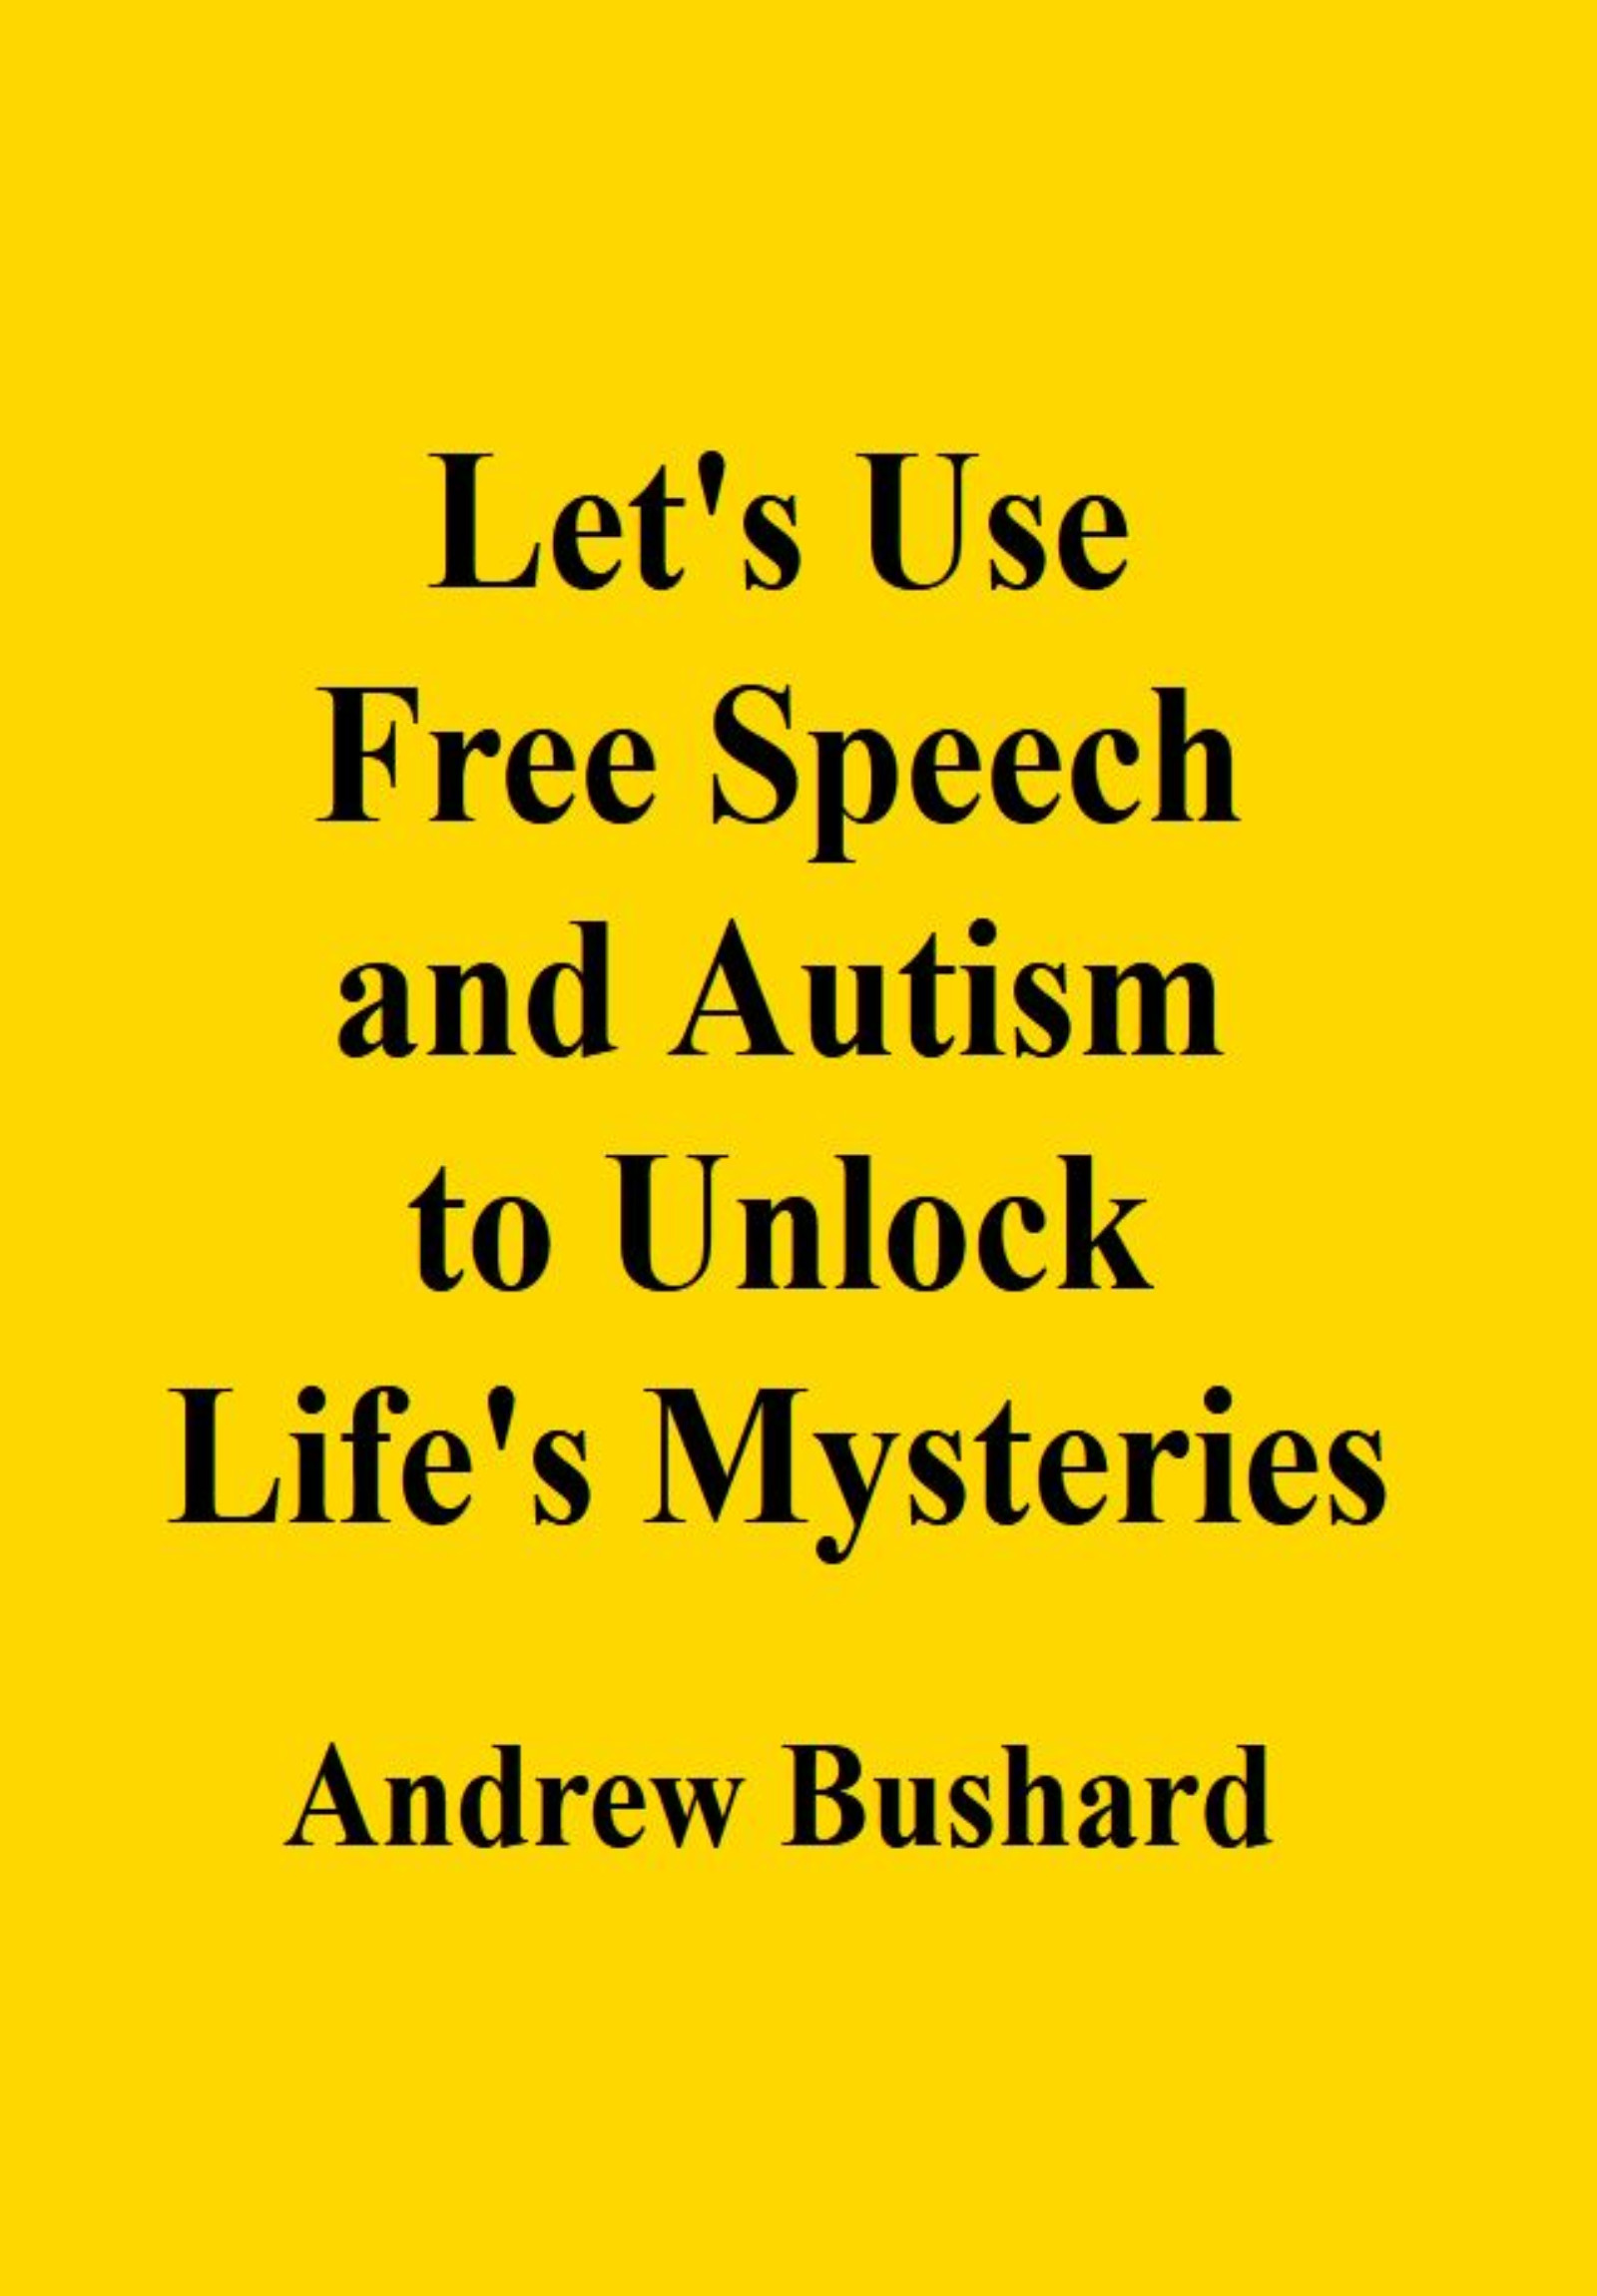 Let's Use Free Speech and Autism to Unlock Life's Mysteries's featured image